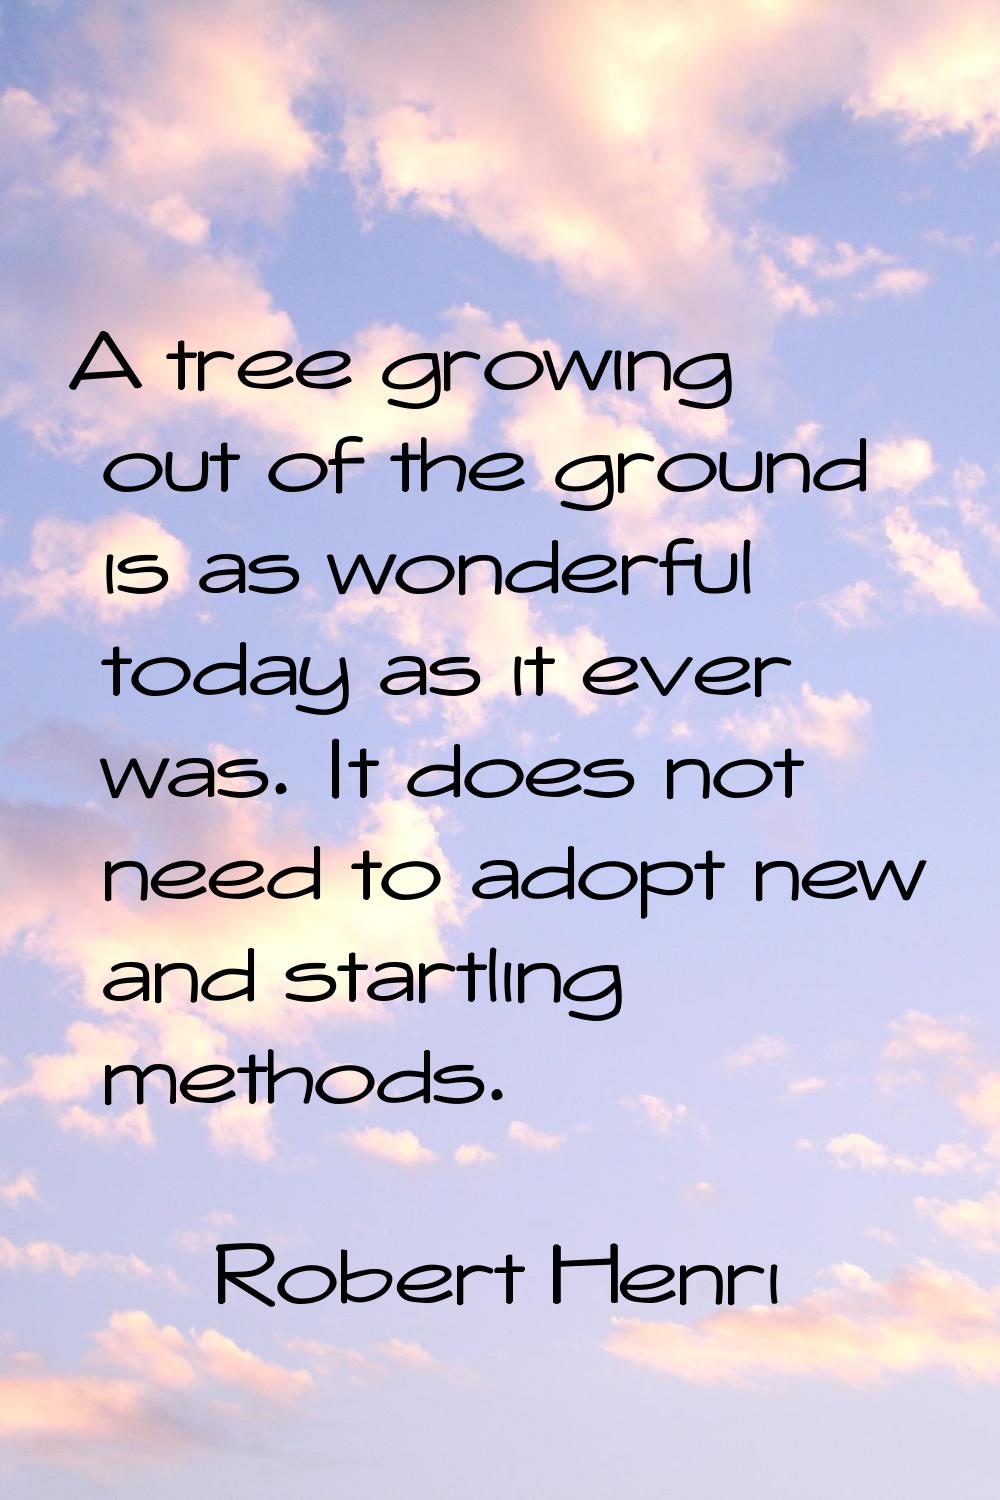 A tree growing out of the ground is as wonderful today as it ever was. It does not need to adopt ne